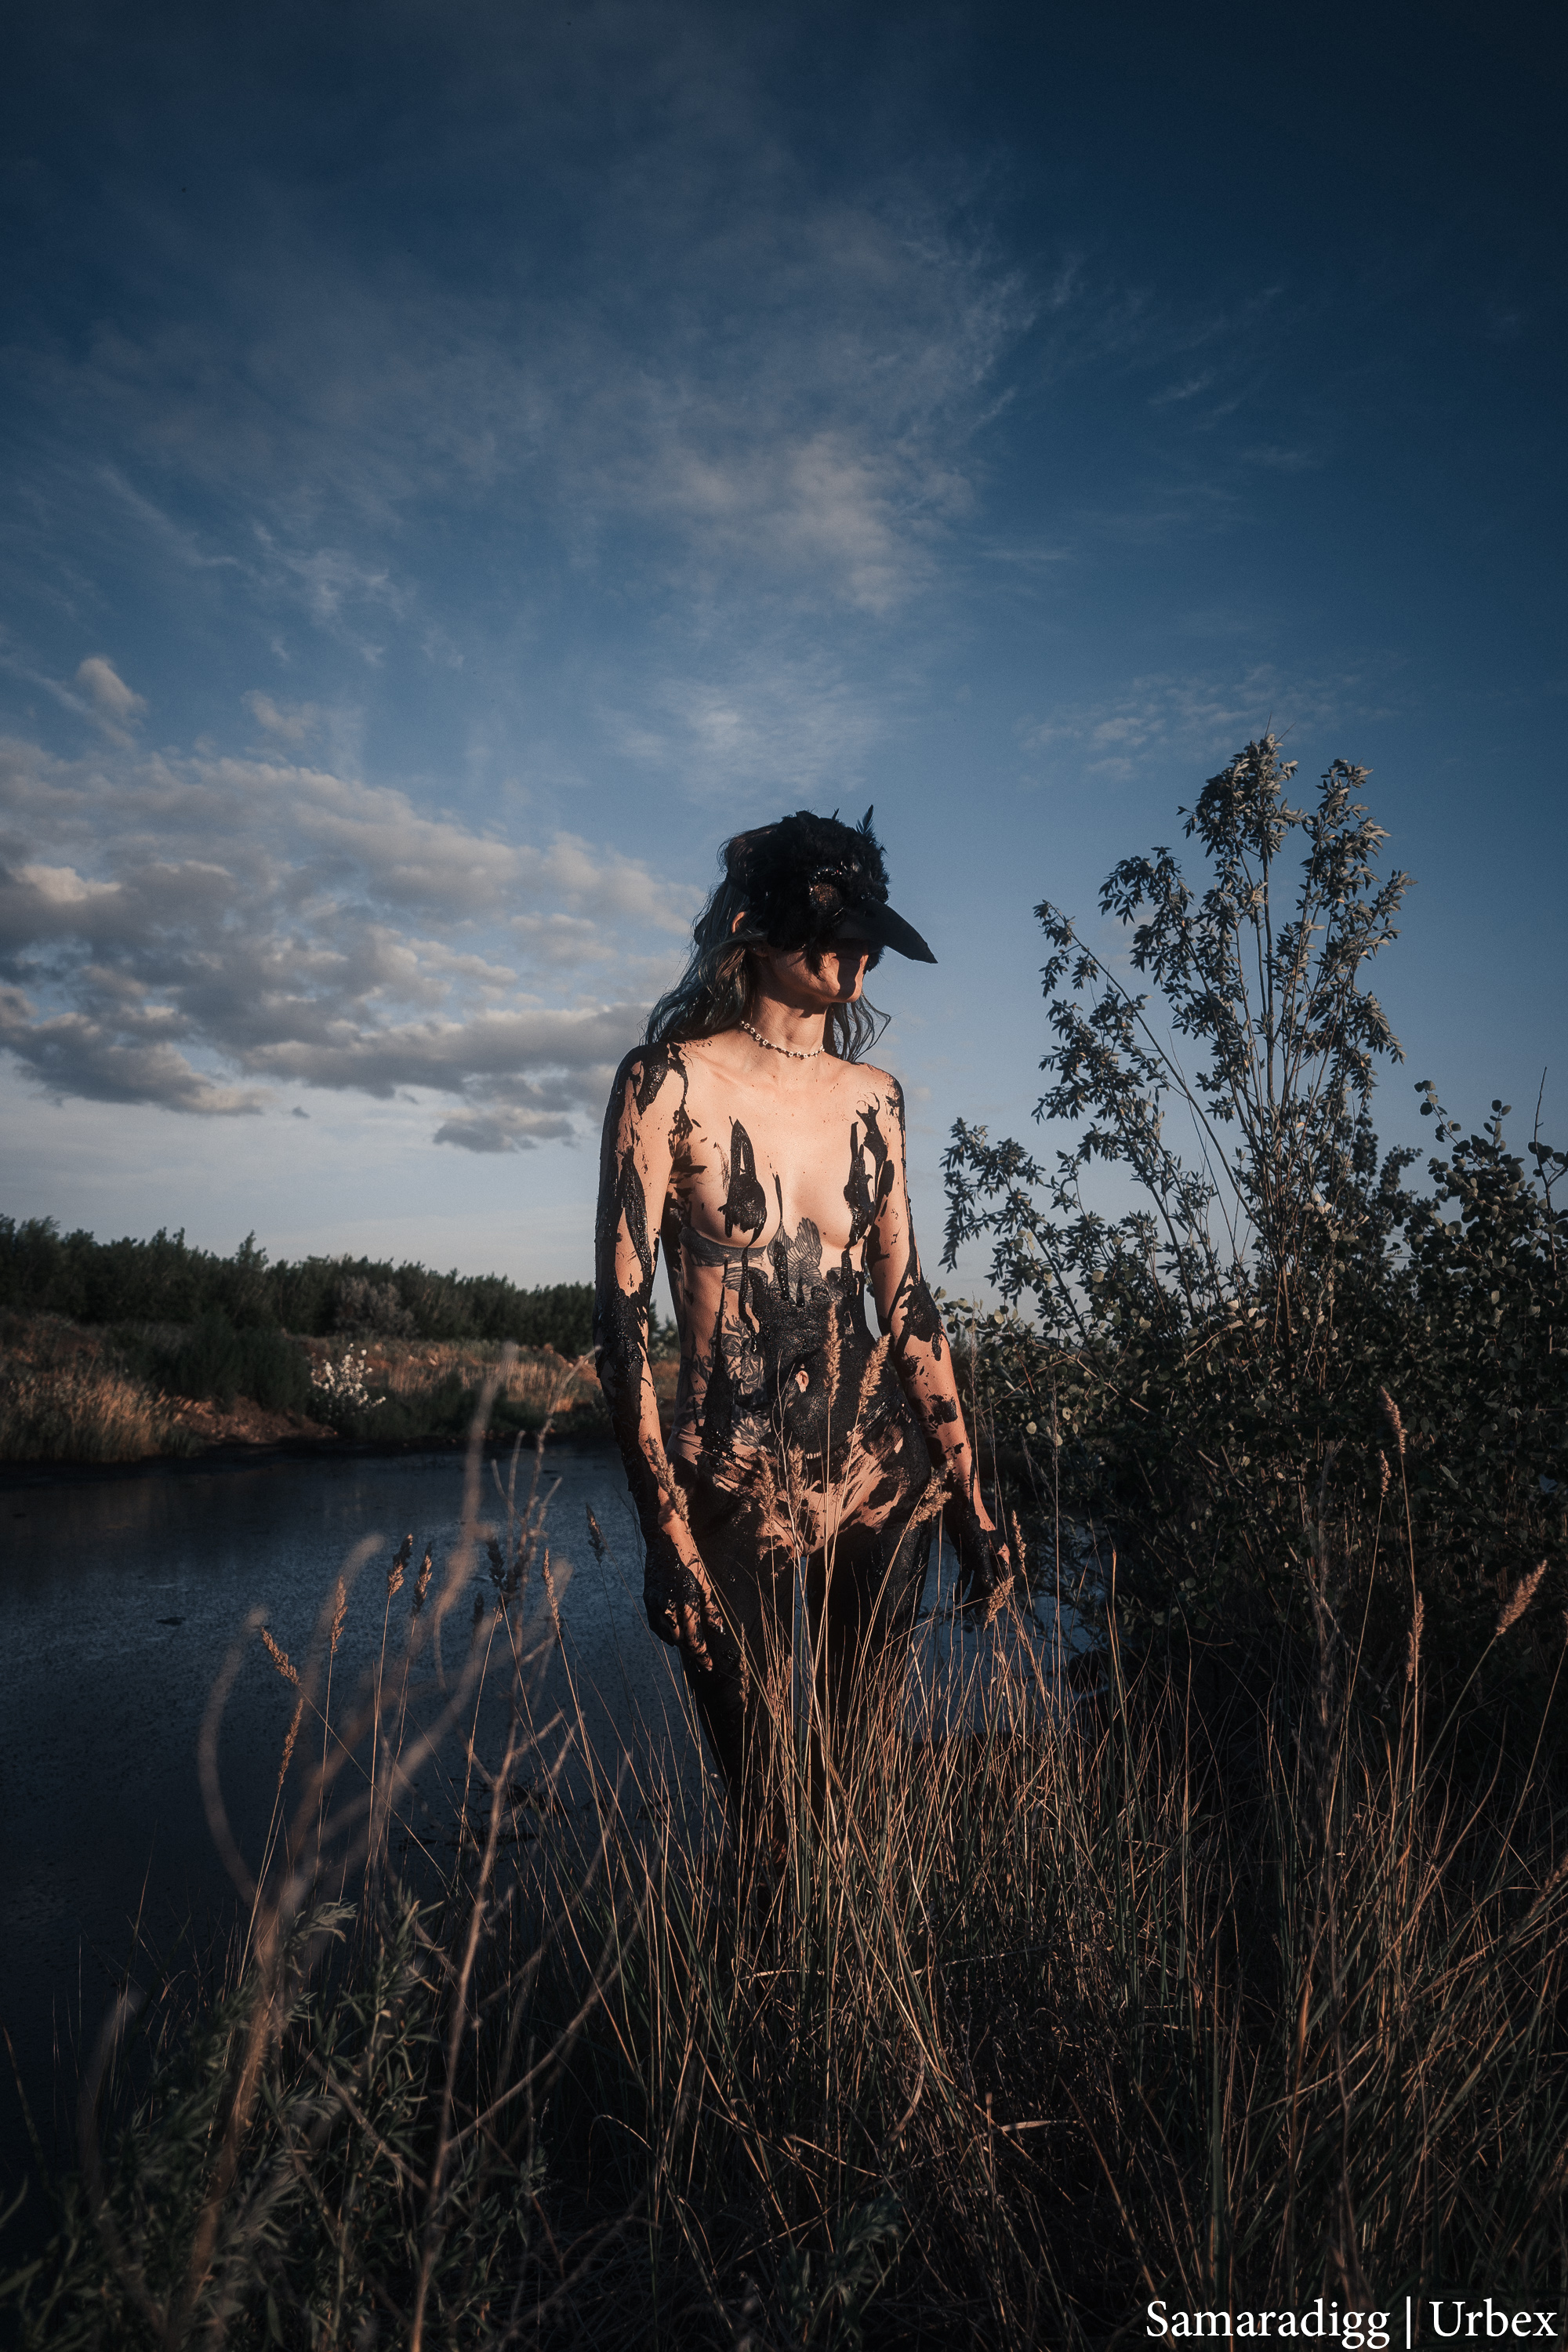 Toxic legacy: no one needs fuel oil lakes in Samara! - NSFW, My, Urbanphoto, Russia, Ecology, Fuel oil, Incident, Samara, Nature, Water, , Urbanfact, PHOTOSESSION, Oil, Tar, Water, Protection of Nature, Negative, Longpost, Boobs, Erotic, Sex, Nudity, Booty